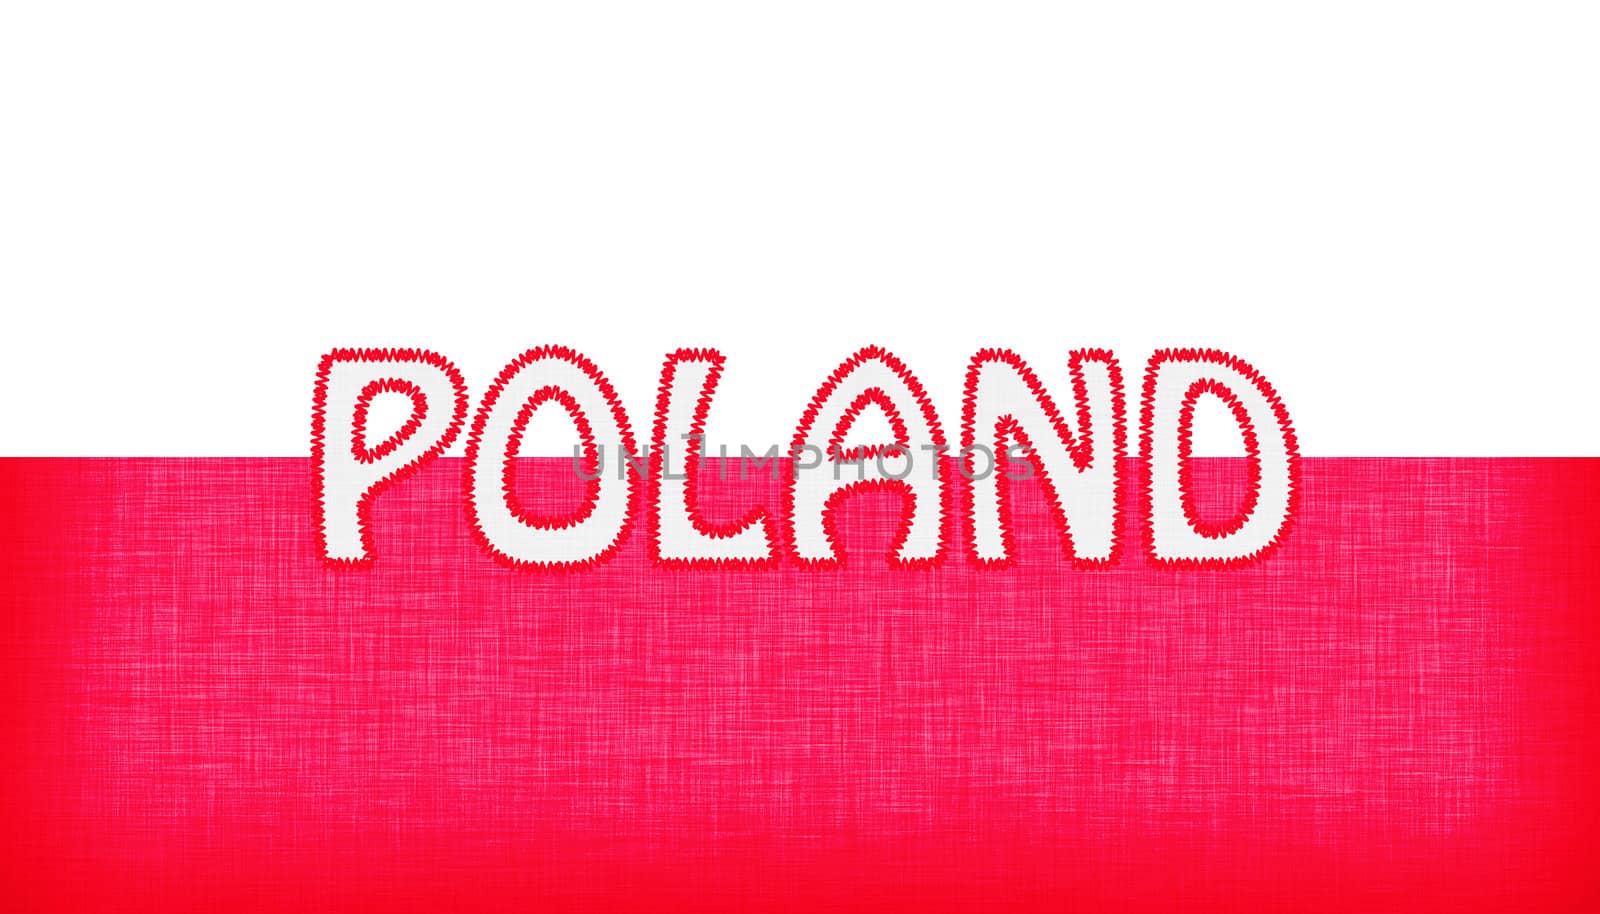 Flag of Poland stitched with letters, isolated